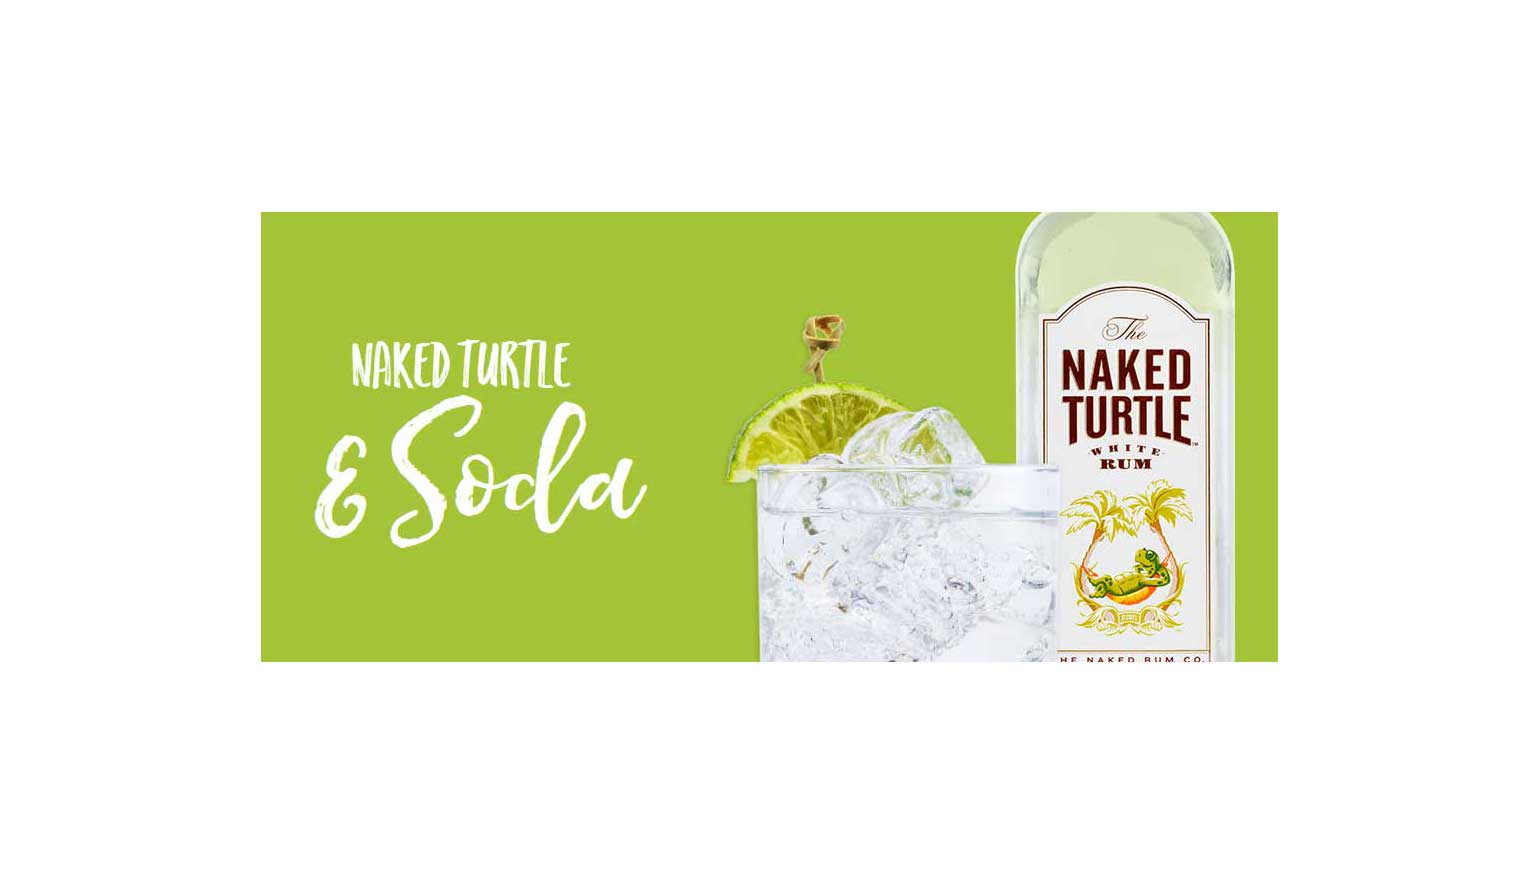 Teach your old Vodka Soda some delicious new tricks by adding fresh lime and our pristine rum. Photo Credit: The Naked Turtle White Rum